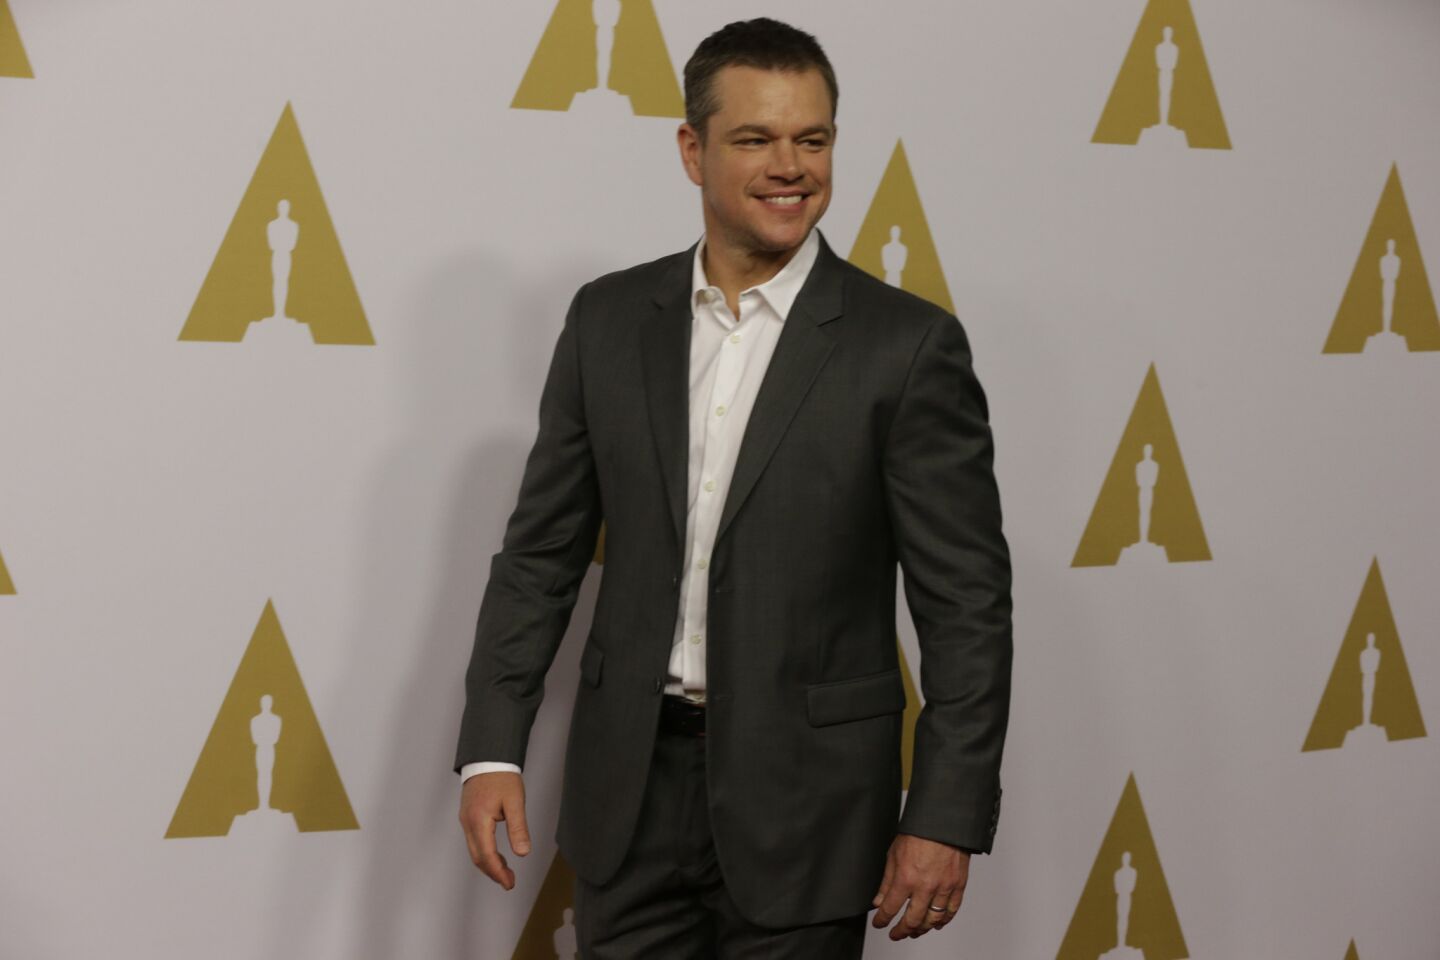 Matt Damon arrives for the 88th annual Academy Awards luncheon at the Beverly Hilton Hotel.